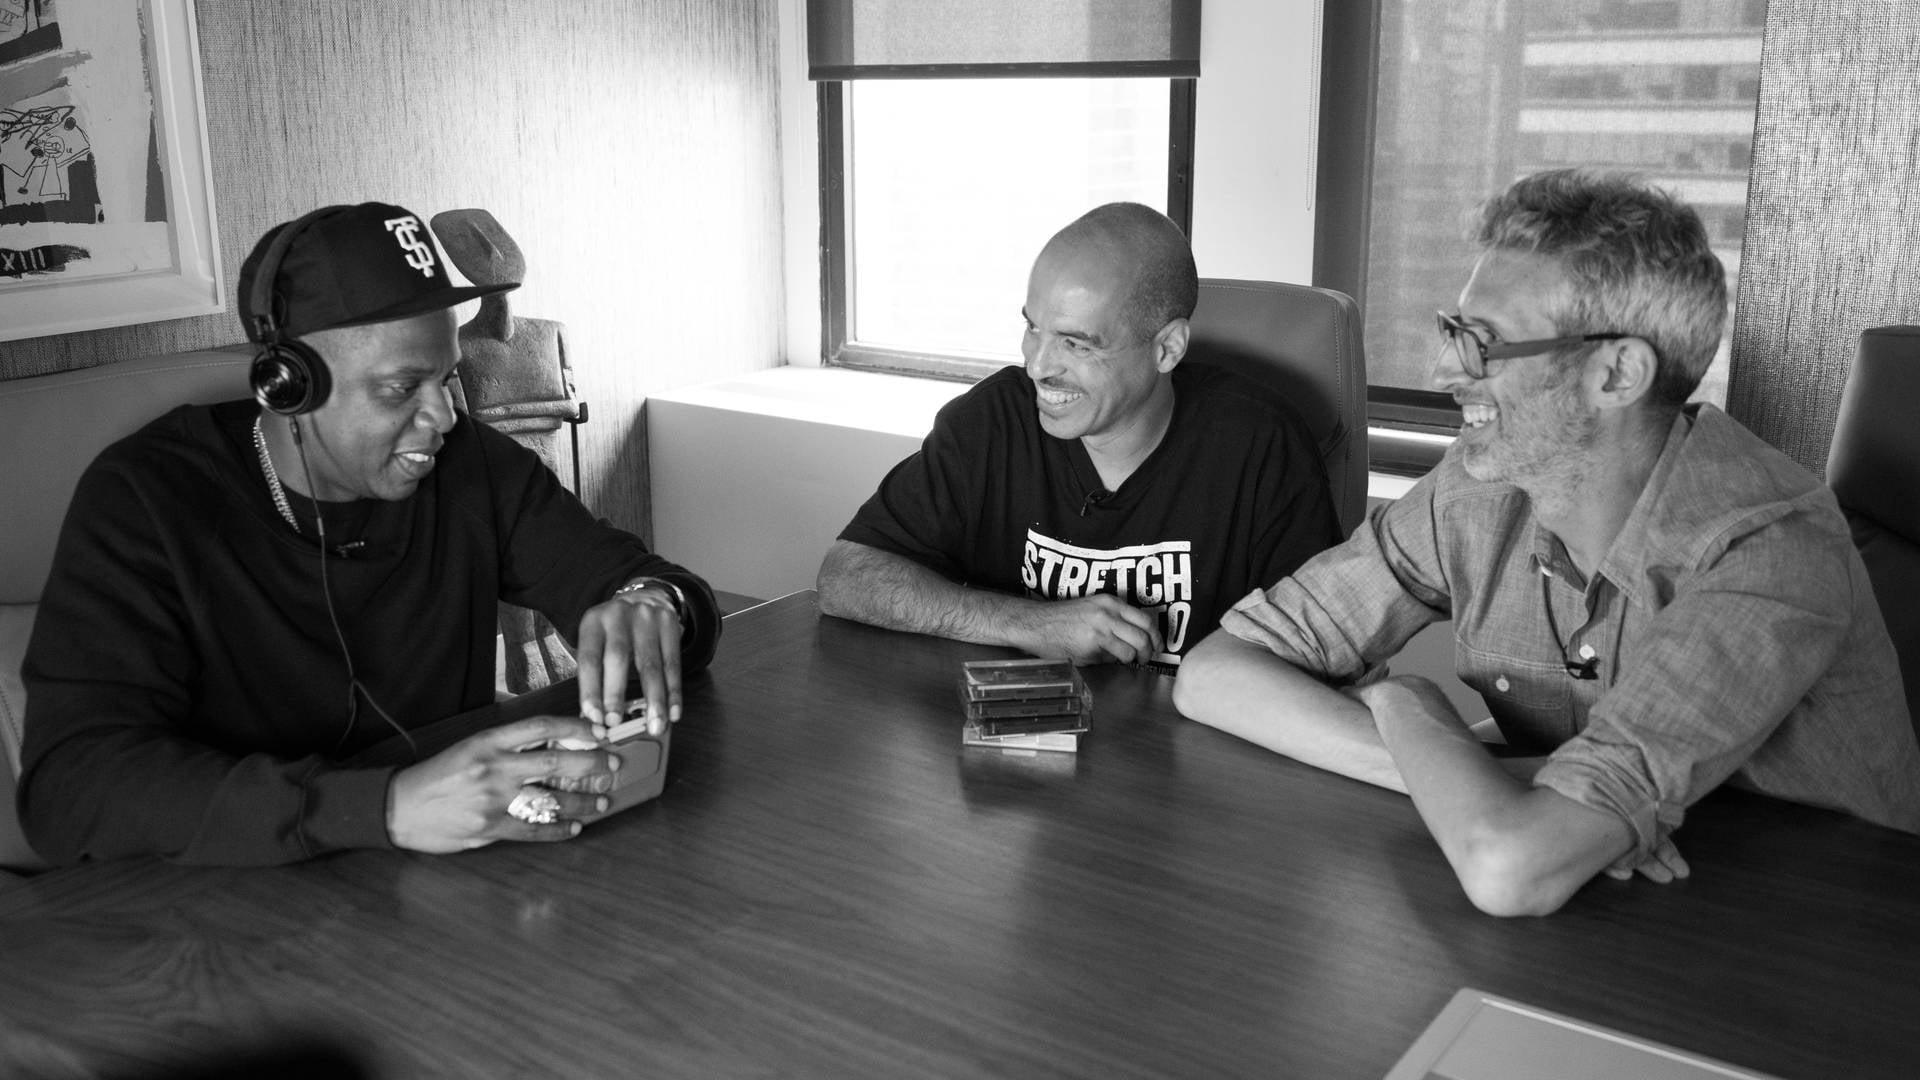 Stretch and Bobbito: Radio That Changed Lives backdrop